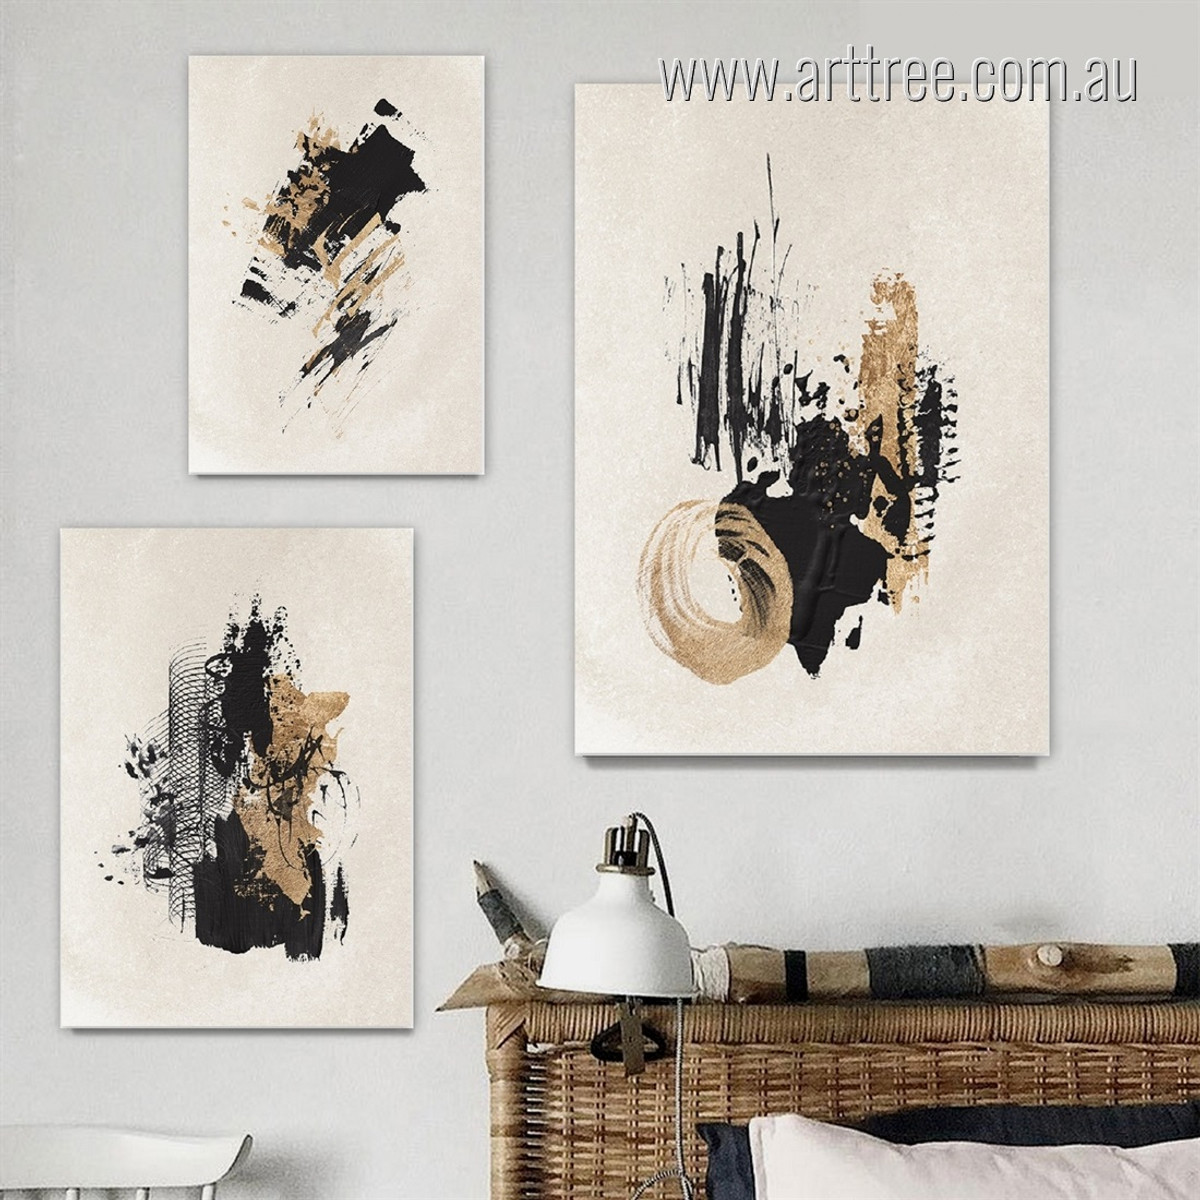 Spiral Design Tarnish Spots Modern Abstract Stretched Photograph Minimalist 3 Panel Set Canvas Print for Room Wall Art Embellishment